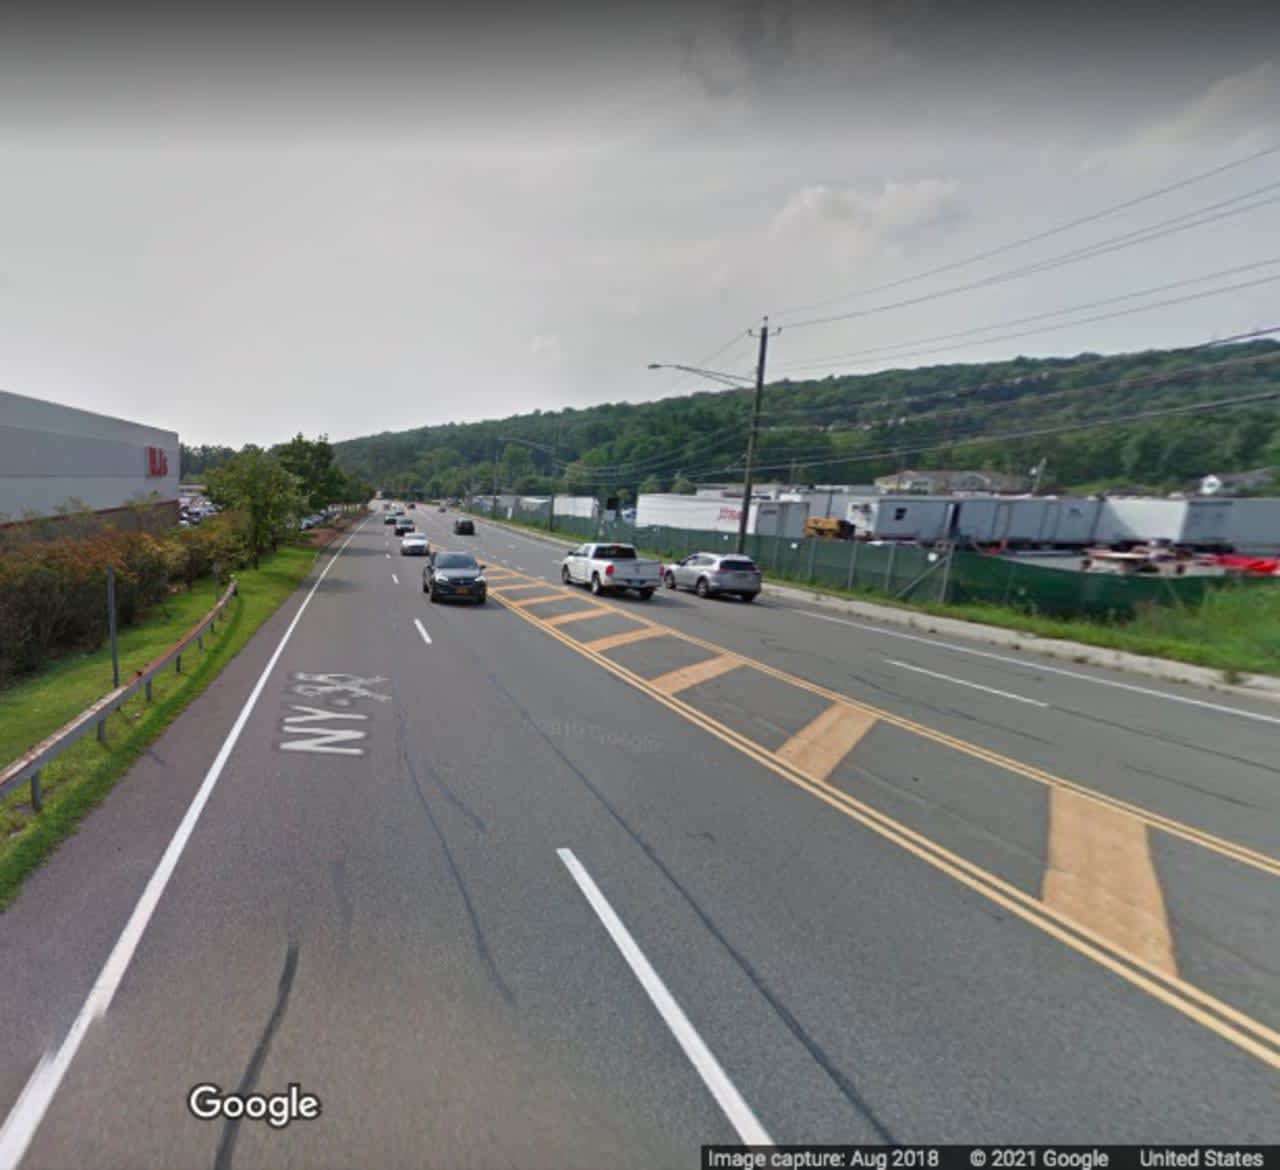 The area where the crash happened on Route 202 (Crompond Road) in Yorktown Heights.